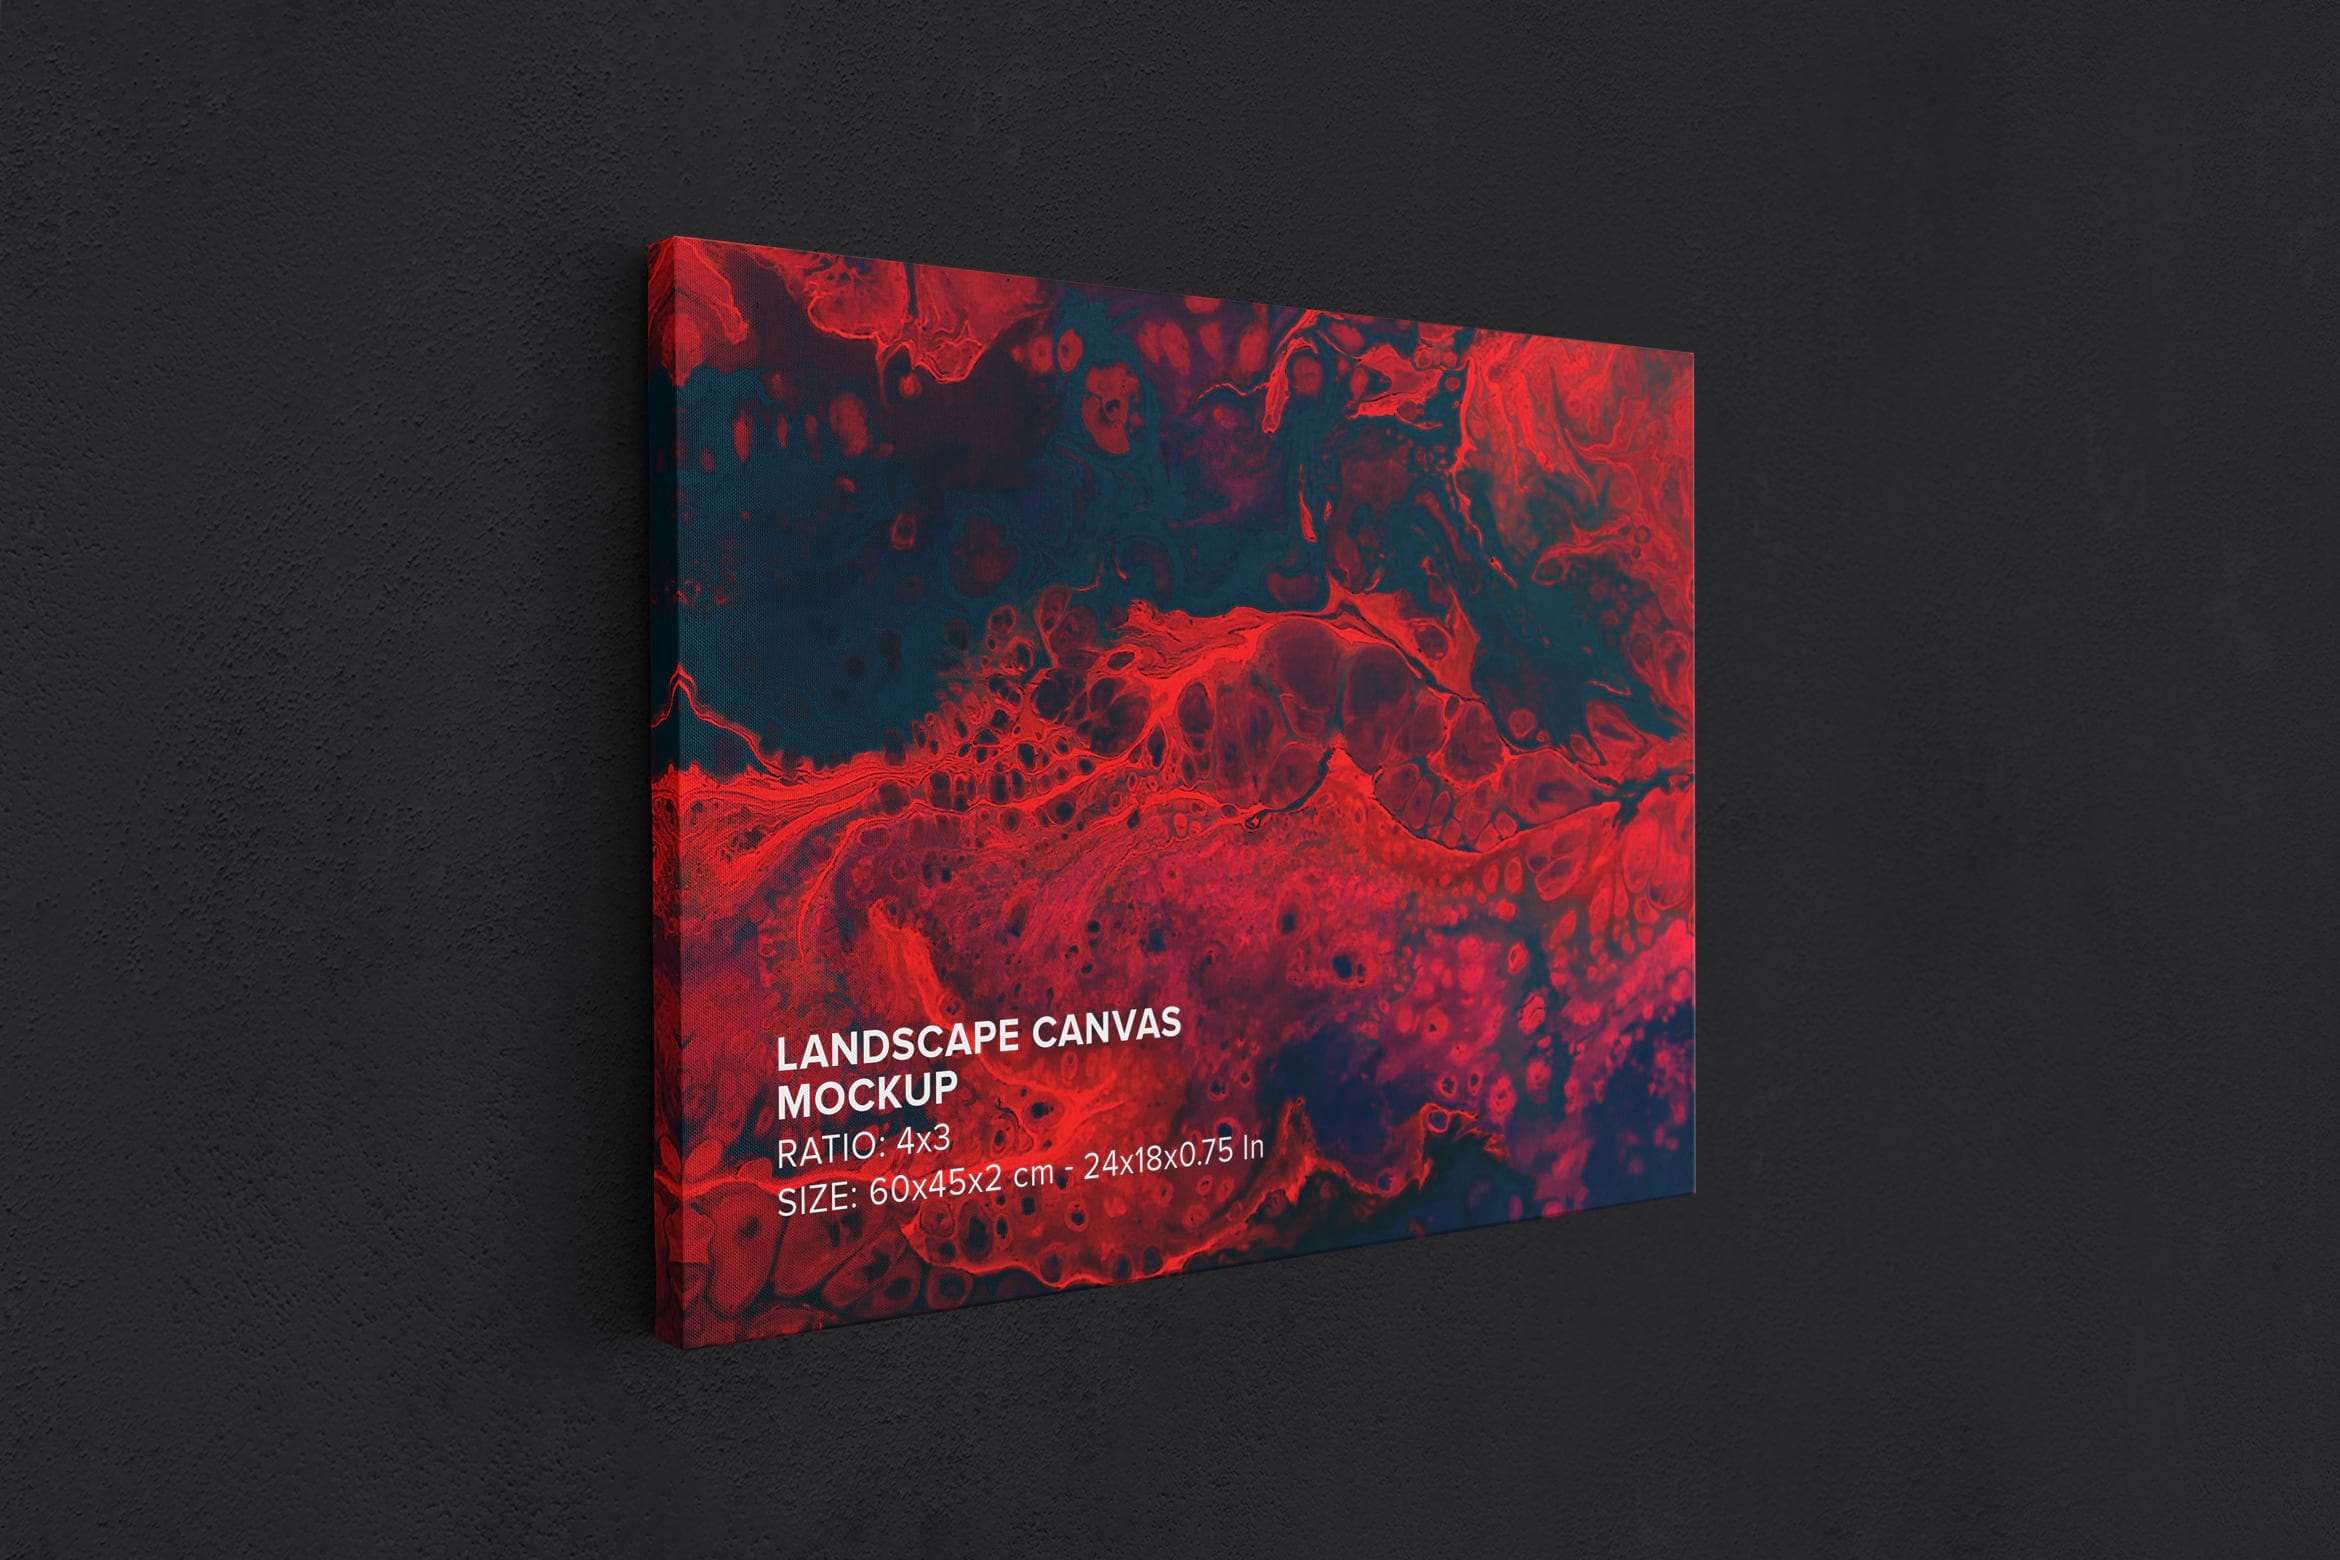 Art Wall Landscape Canvas Ratio 4x3 Mockup - Left 0.75 in Wrap View